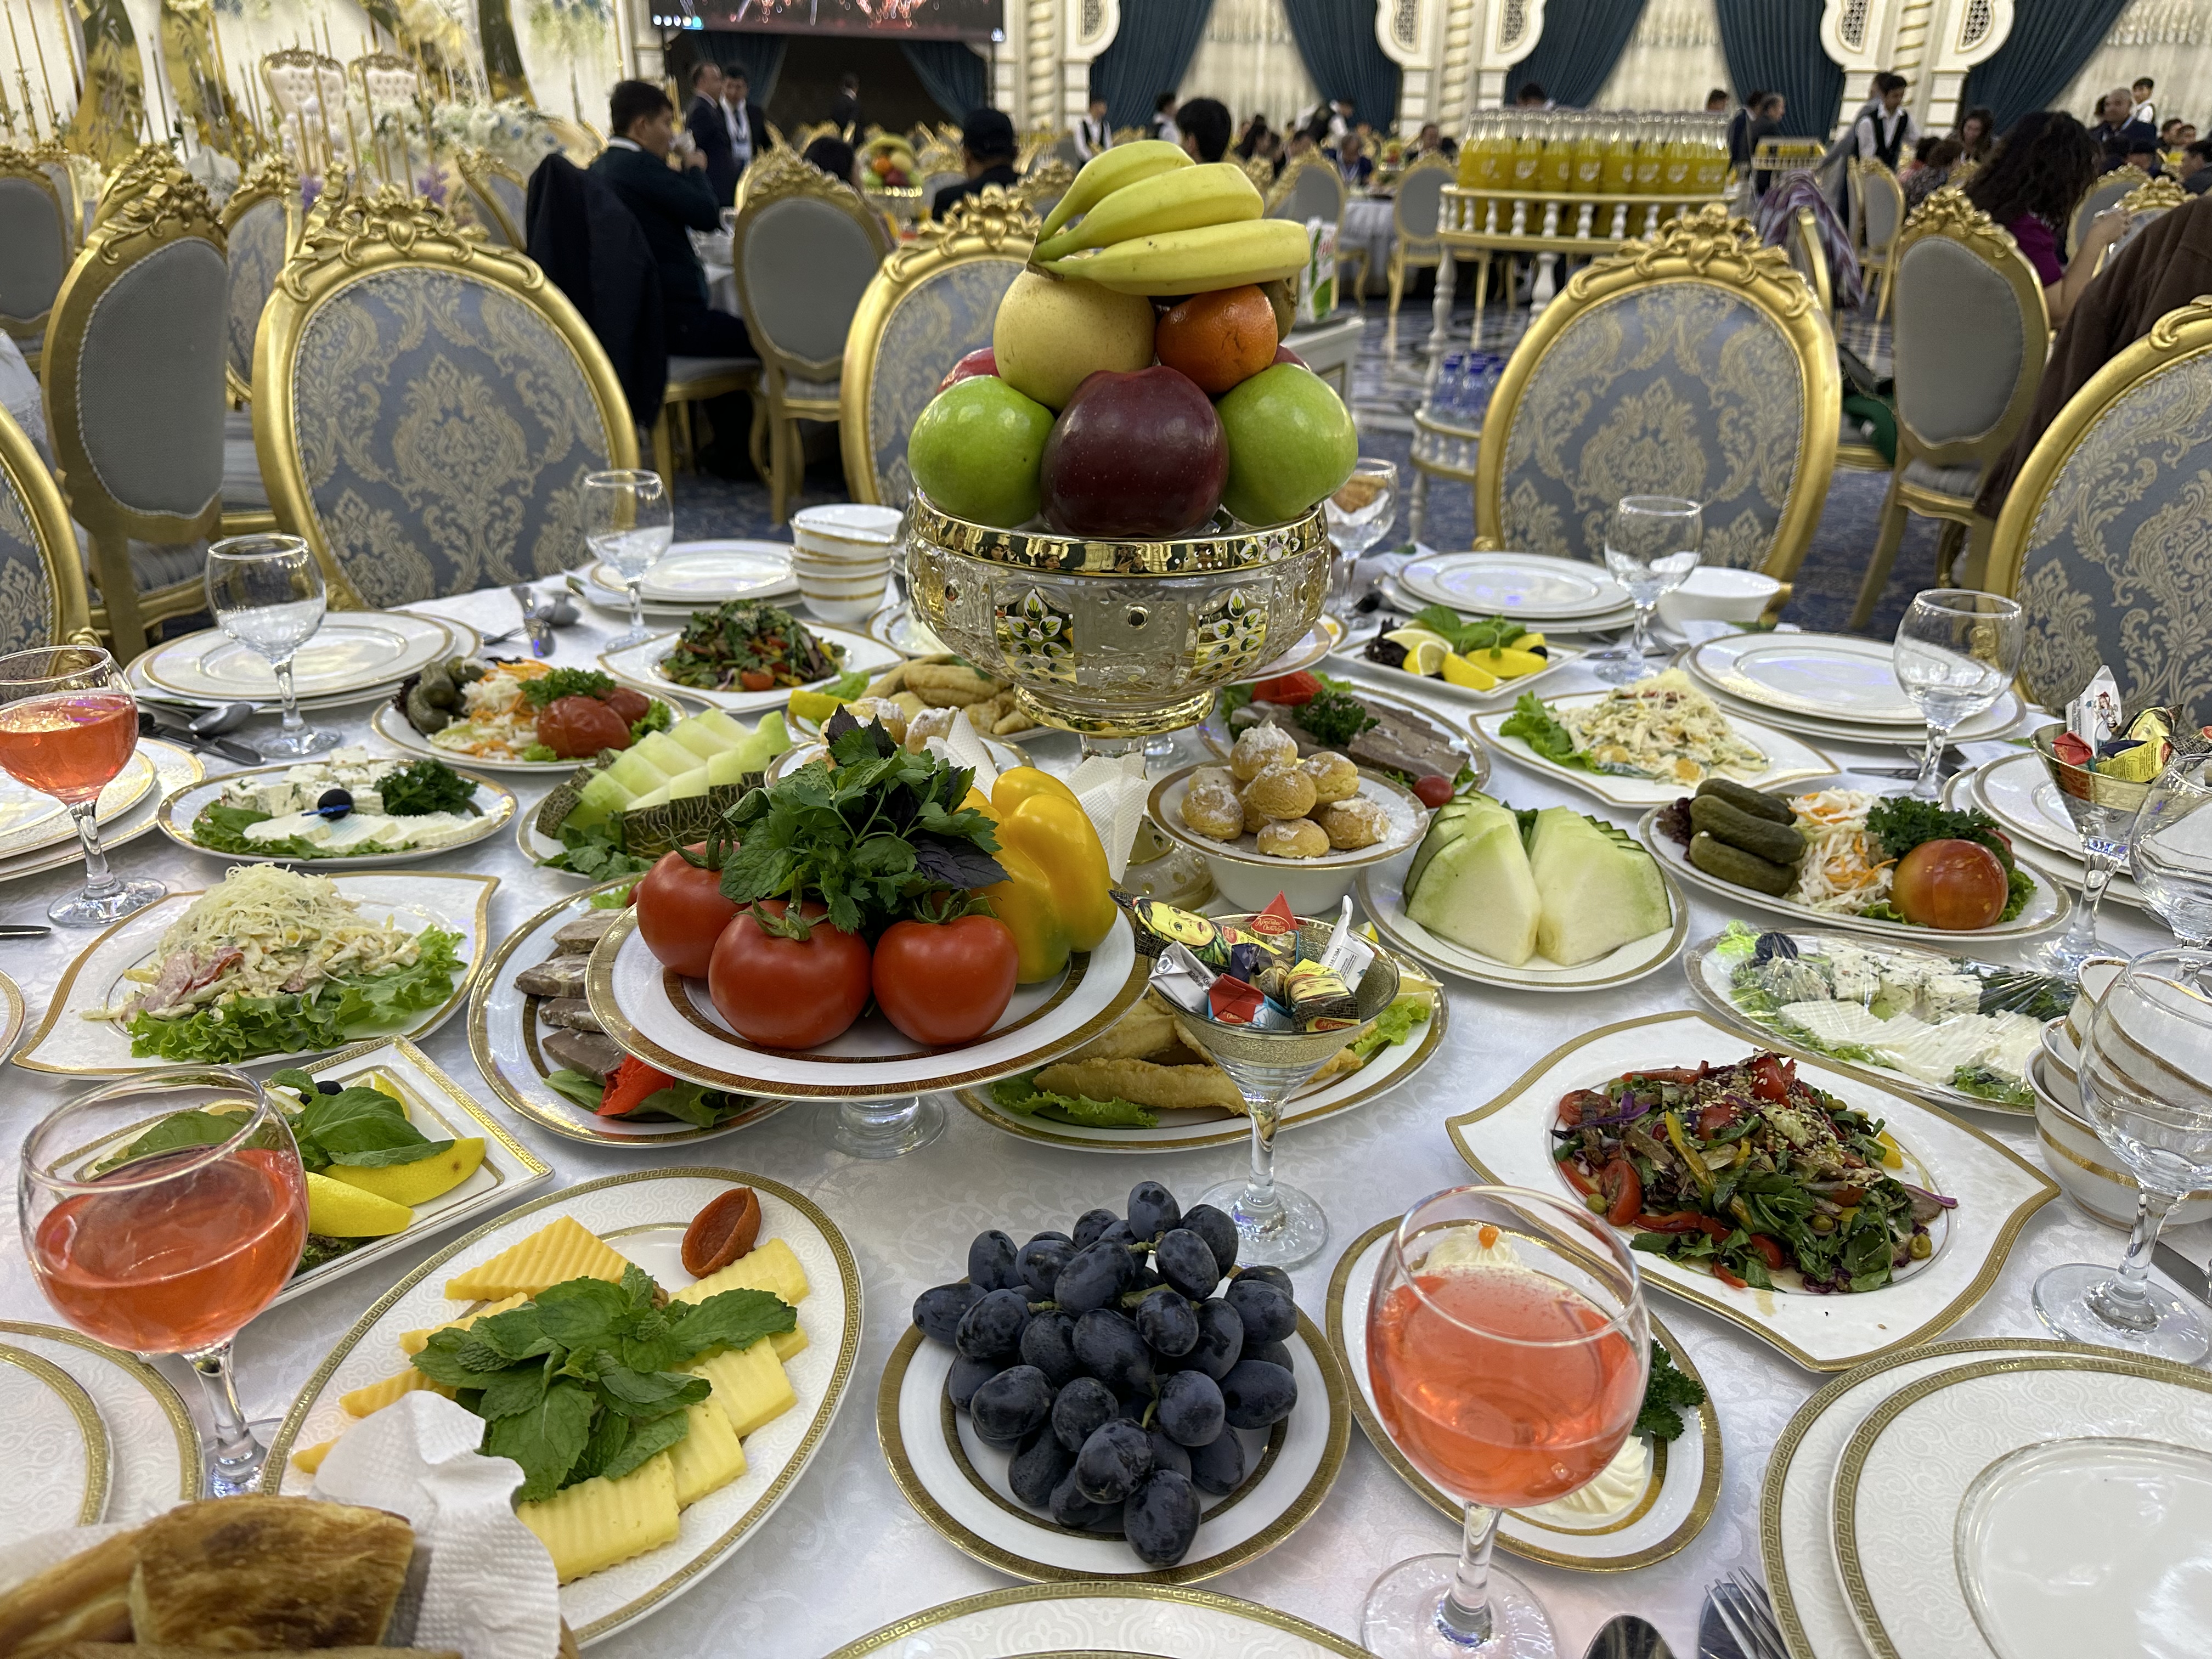 Uzbek cuisine in a restaurant in Salmahan consisting fruits, dried fruits, cheese and bread. Zheng Junfeng/CGTN